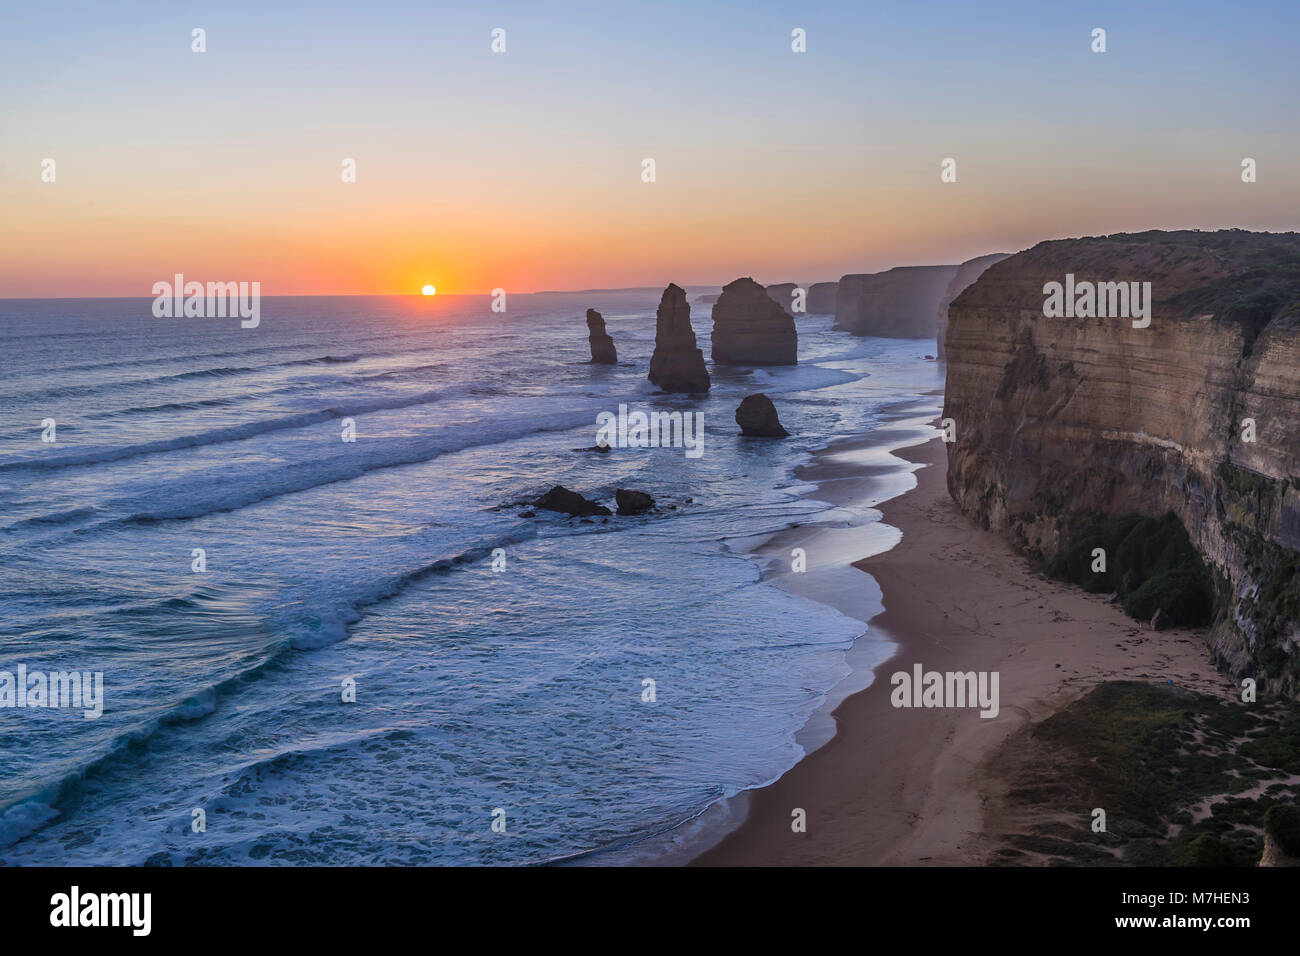 The setting Sun at the Twelve Apostles sea stacks and cliffs on the Great Ocean Road. Stock Photo